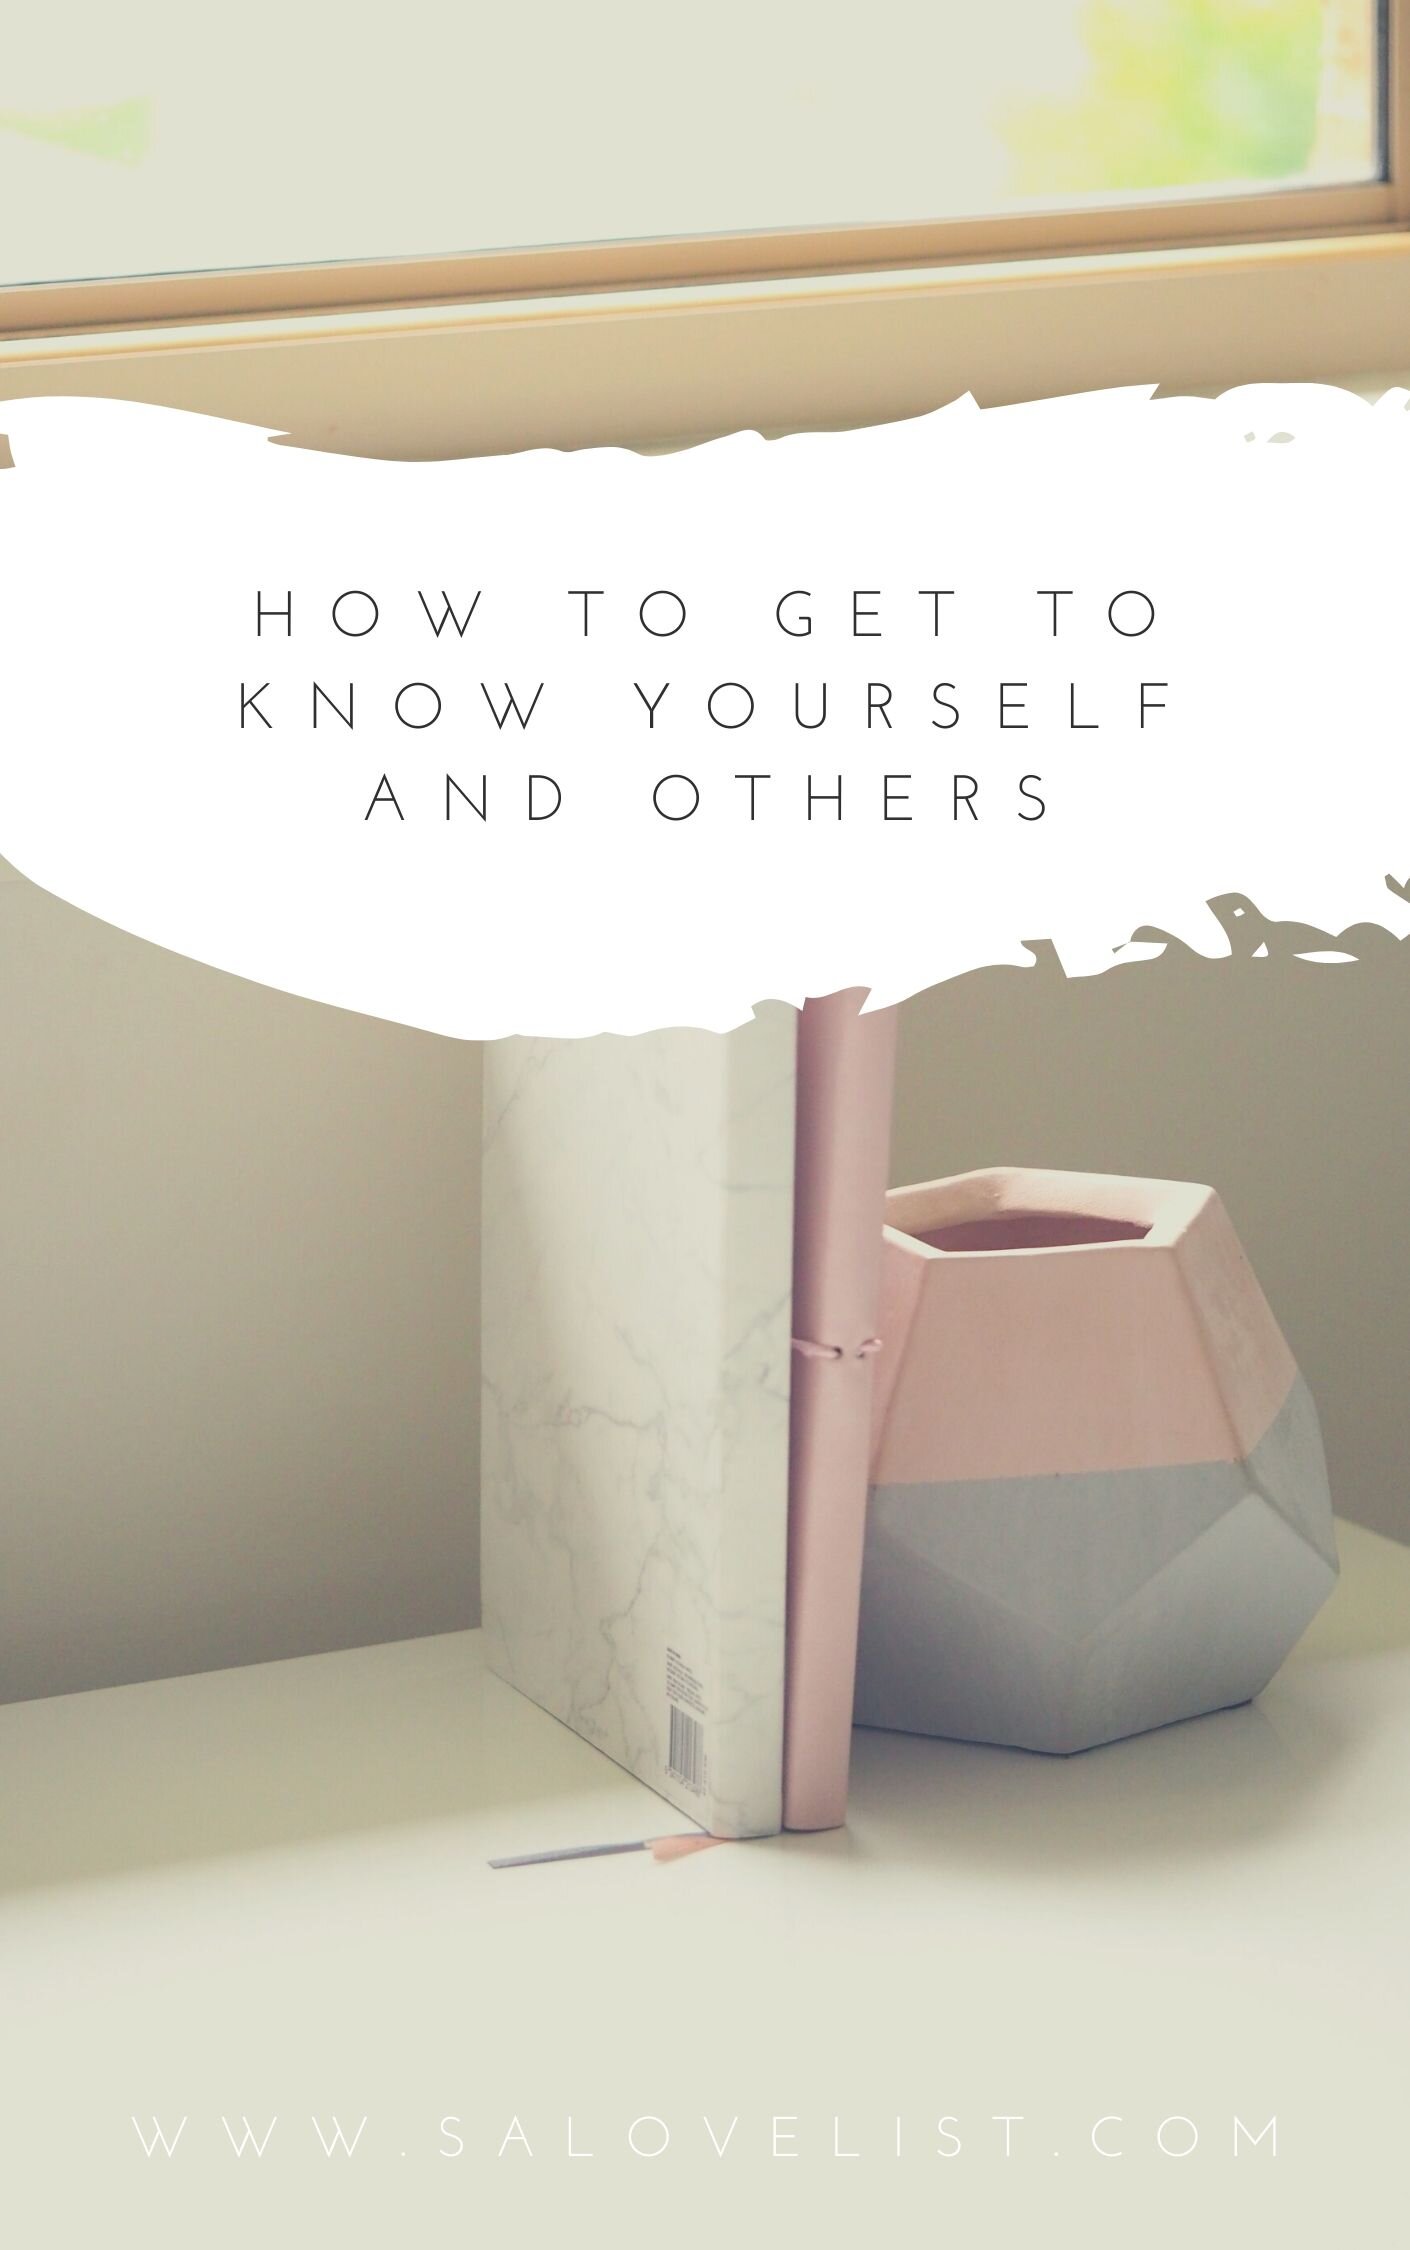 How to Get to Know Yourself and Others